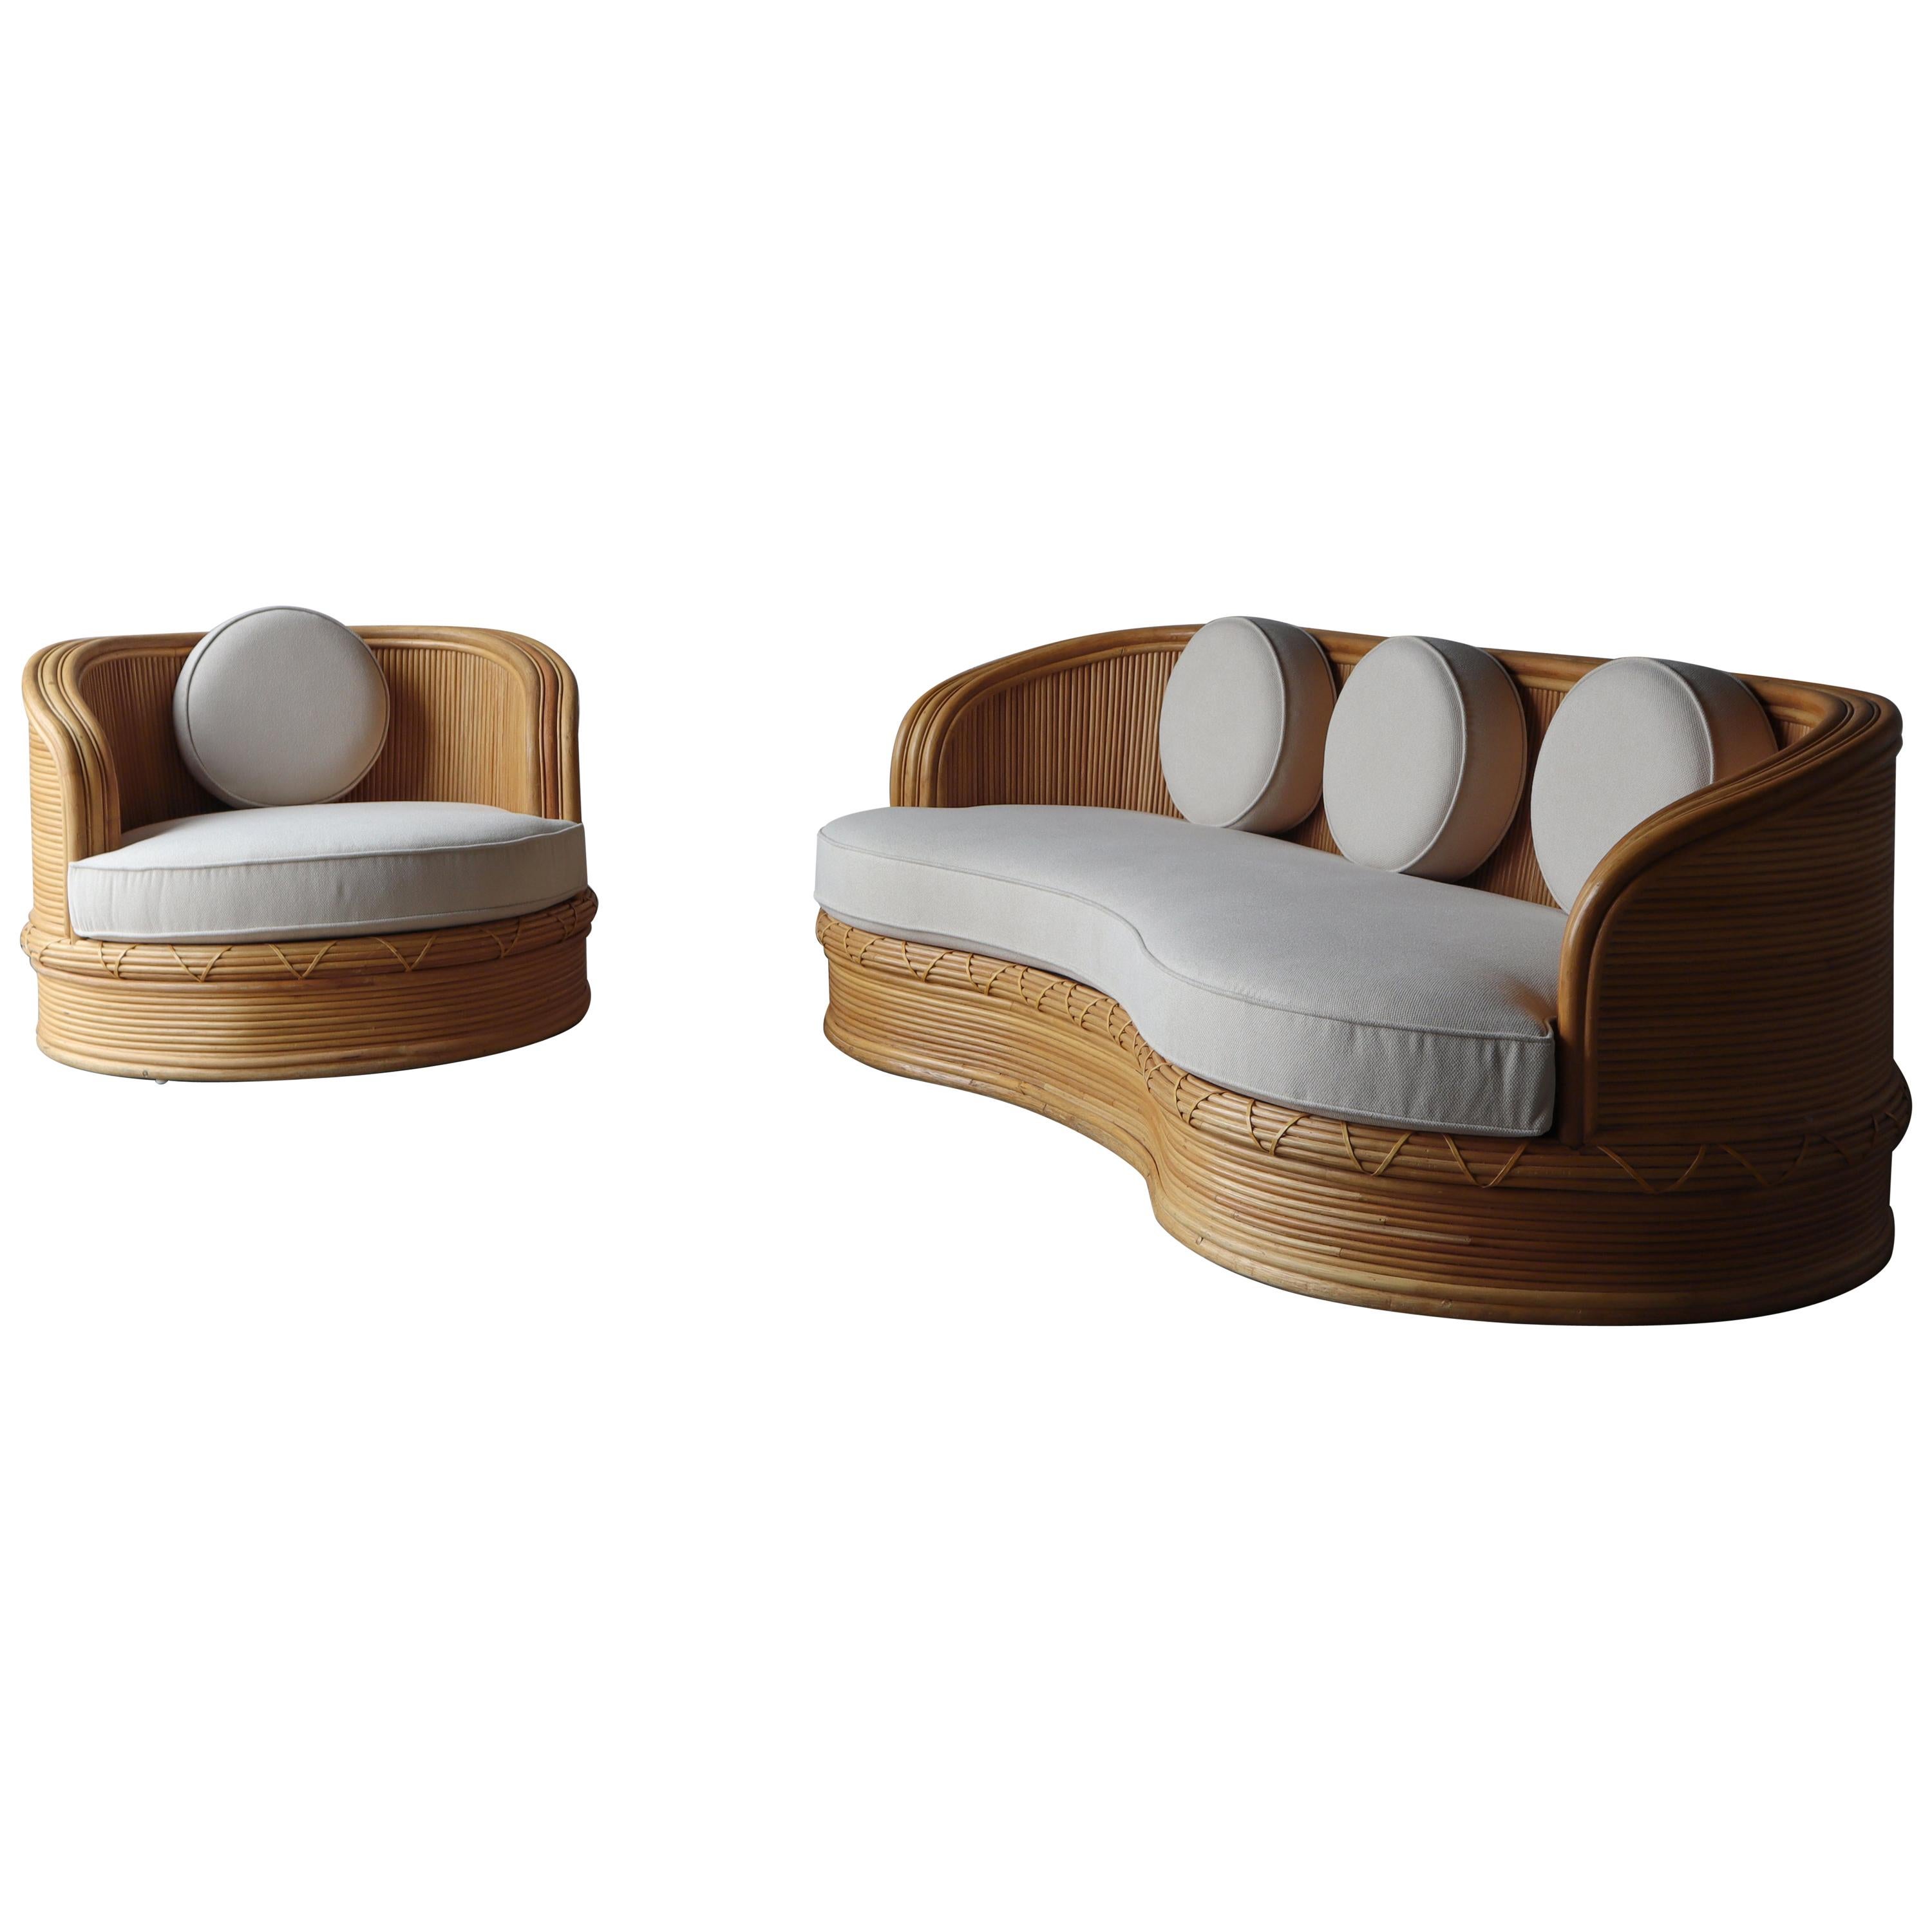 Curved Pencil Reed Bamboo Sofa & Chair